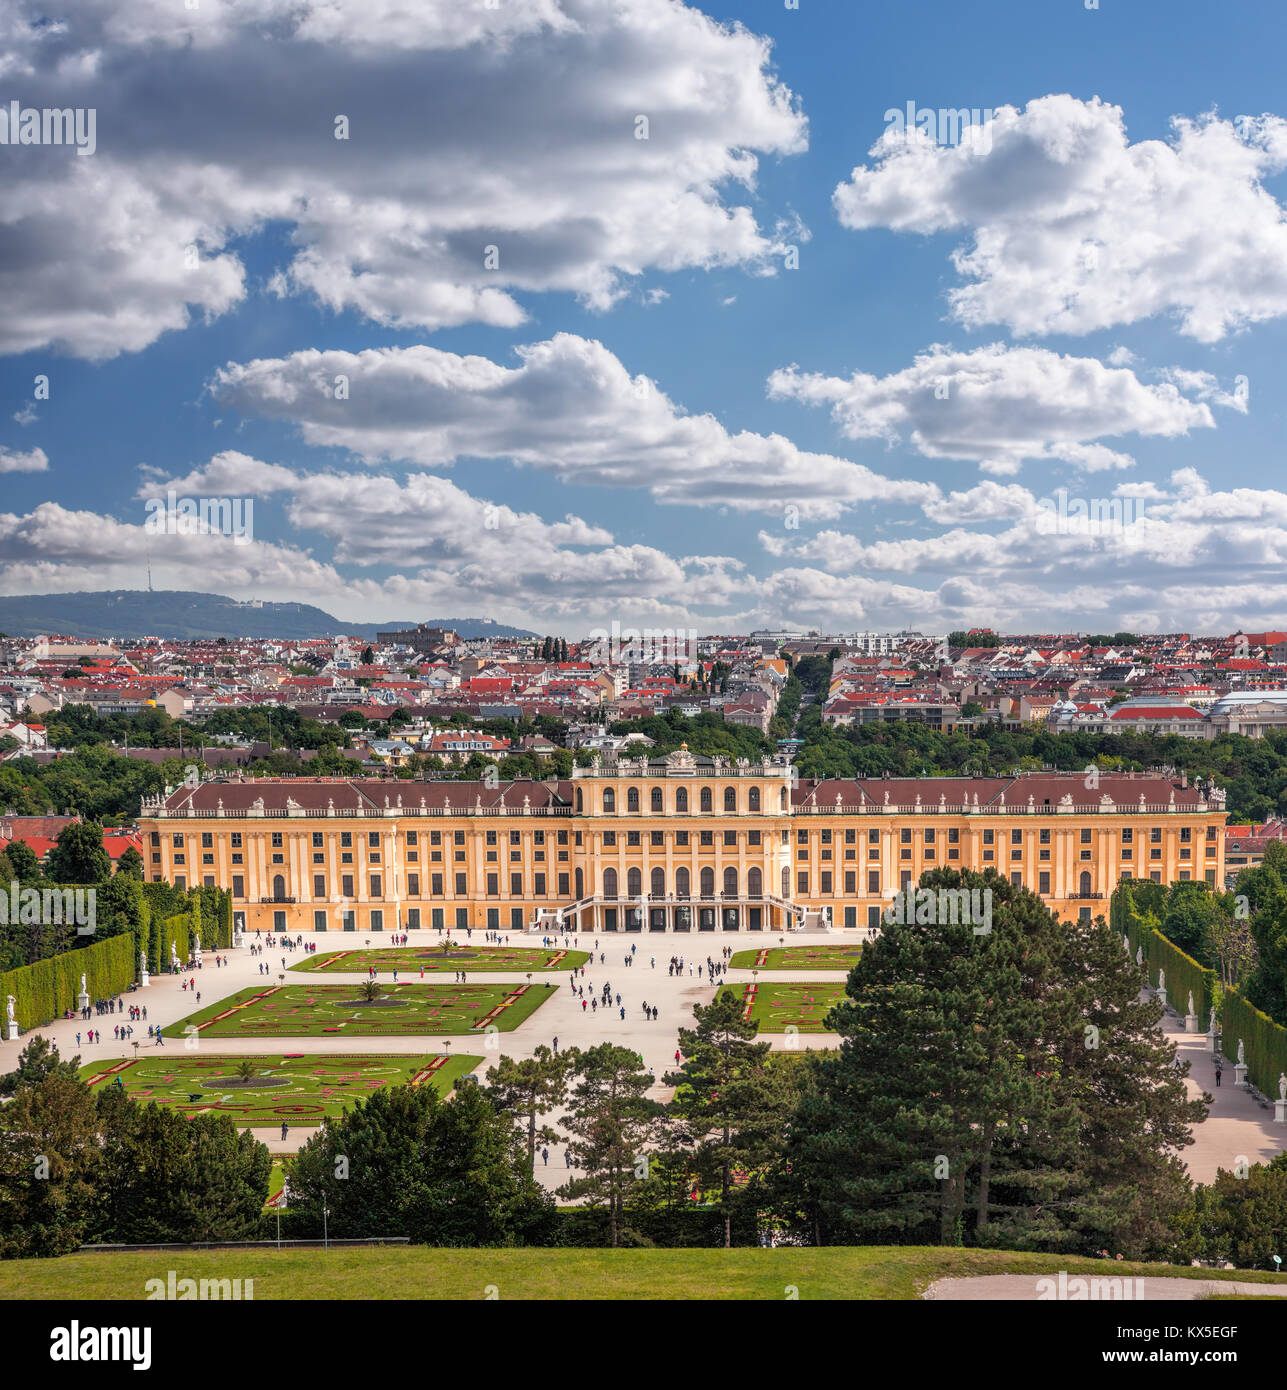 Famous Schonbrunn Palace with gardens in Vienna, Austria Stock Photo